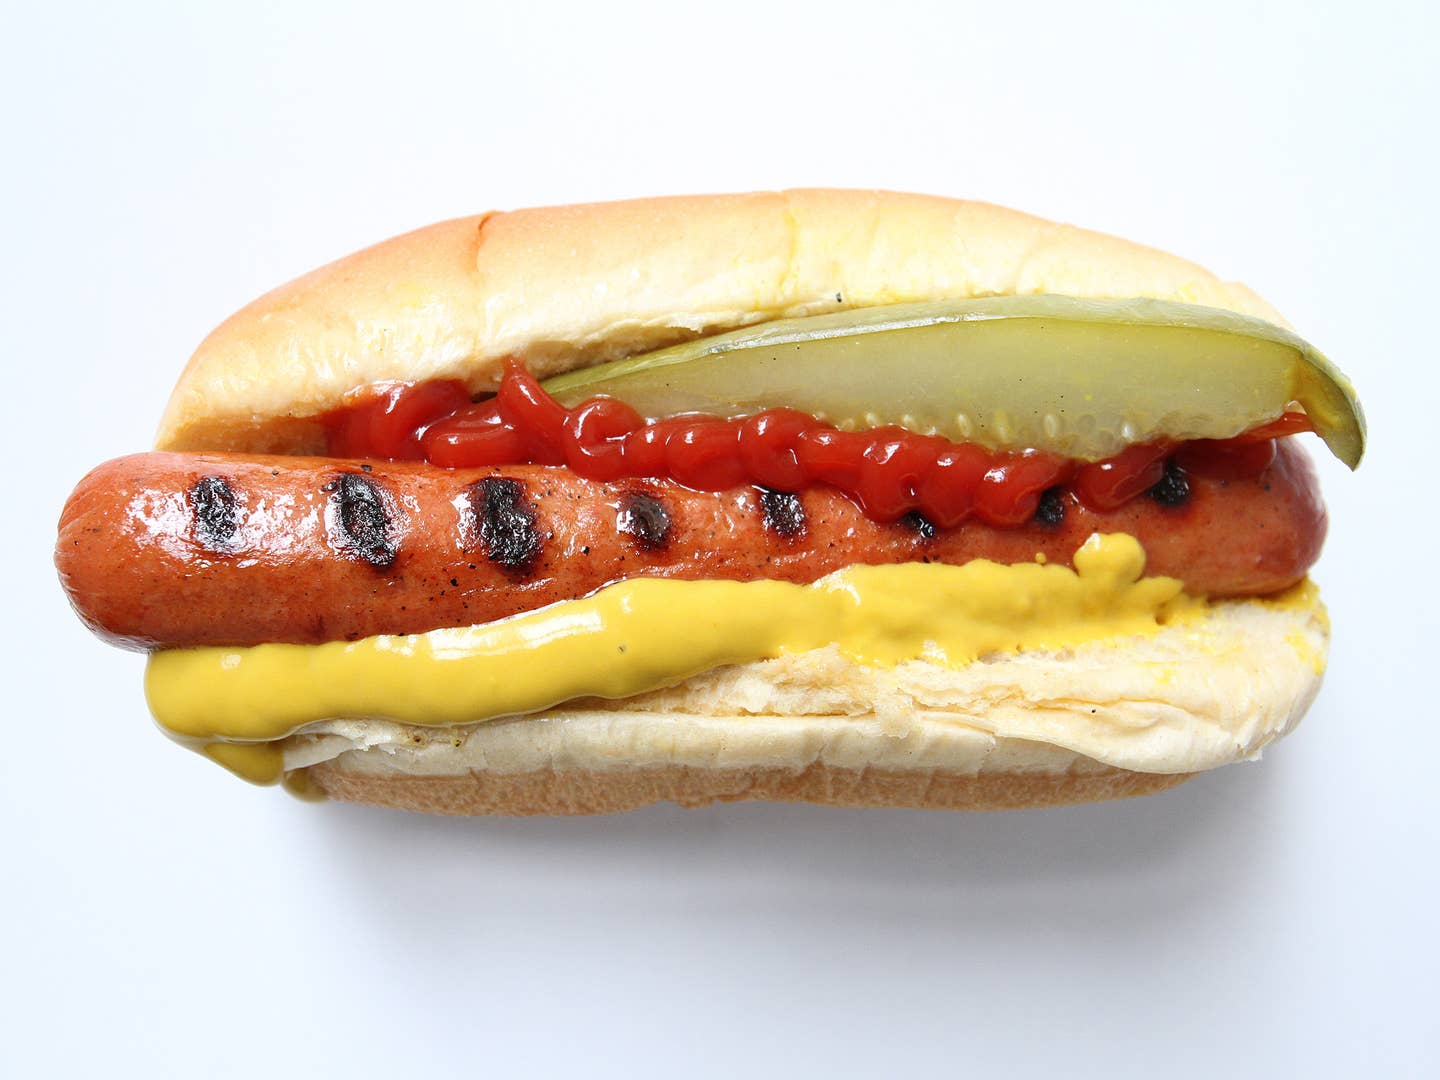 How to Build Your Best Hot Dog